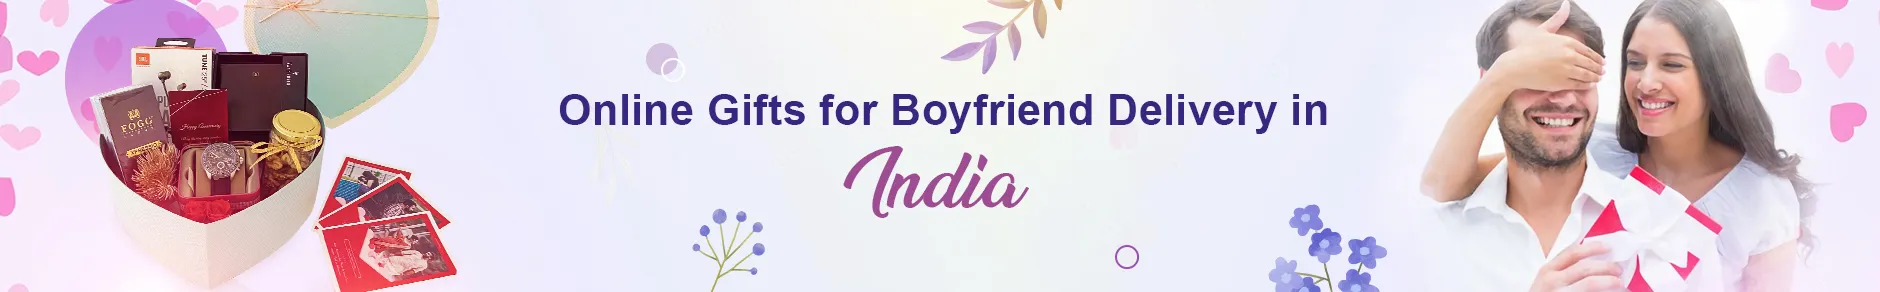 Gifts for Boyfriend to India